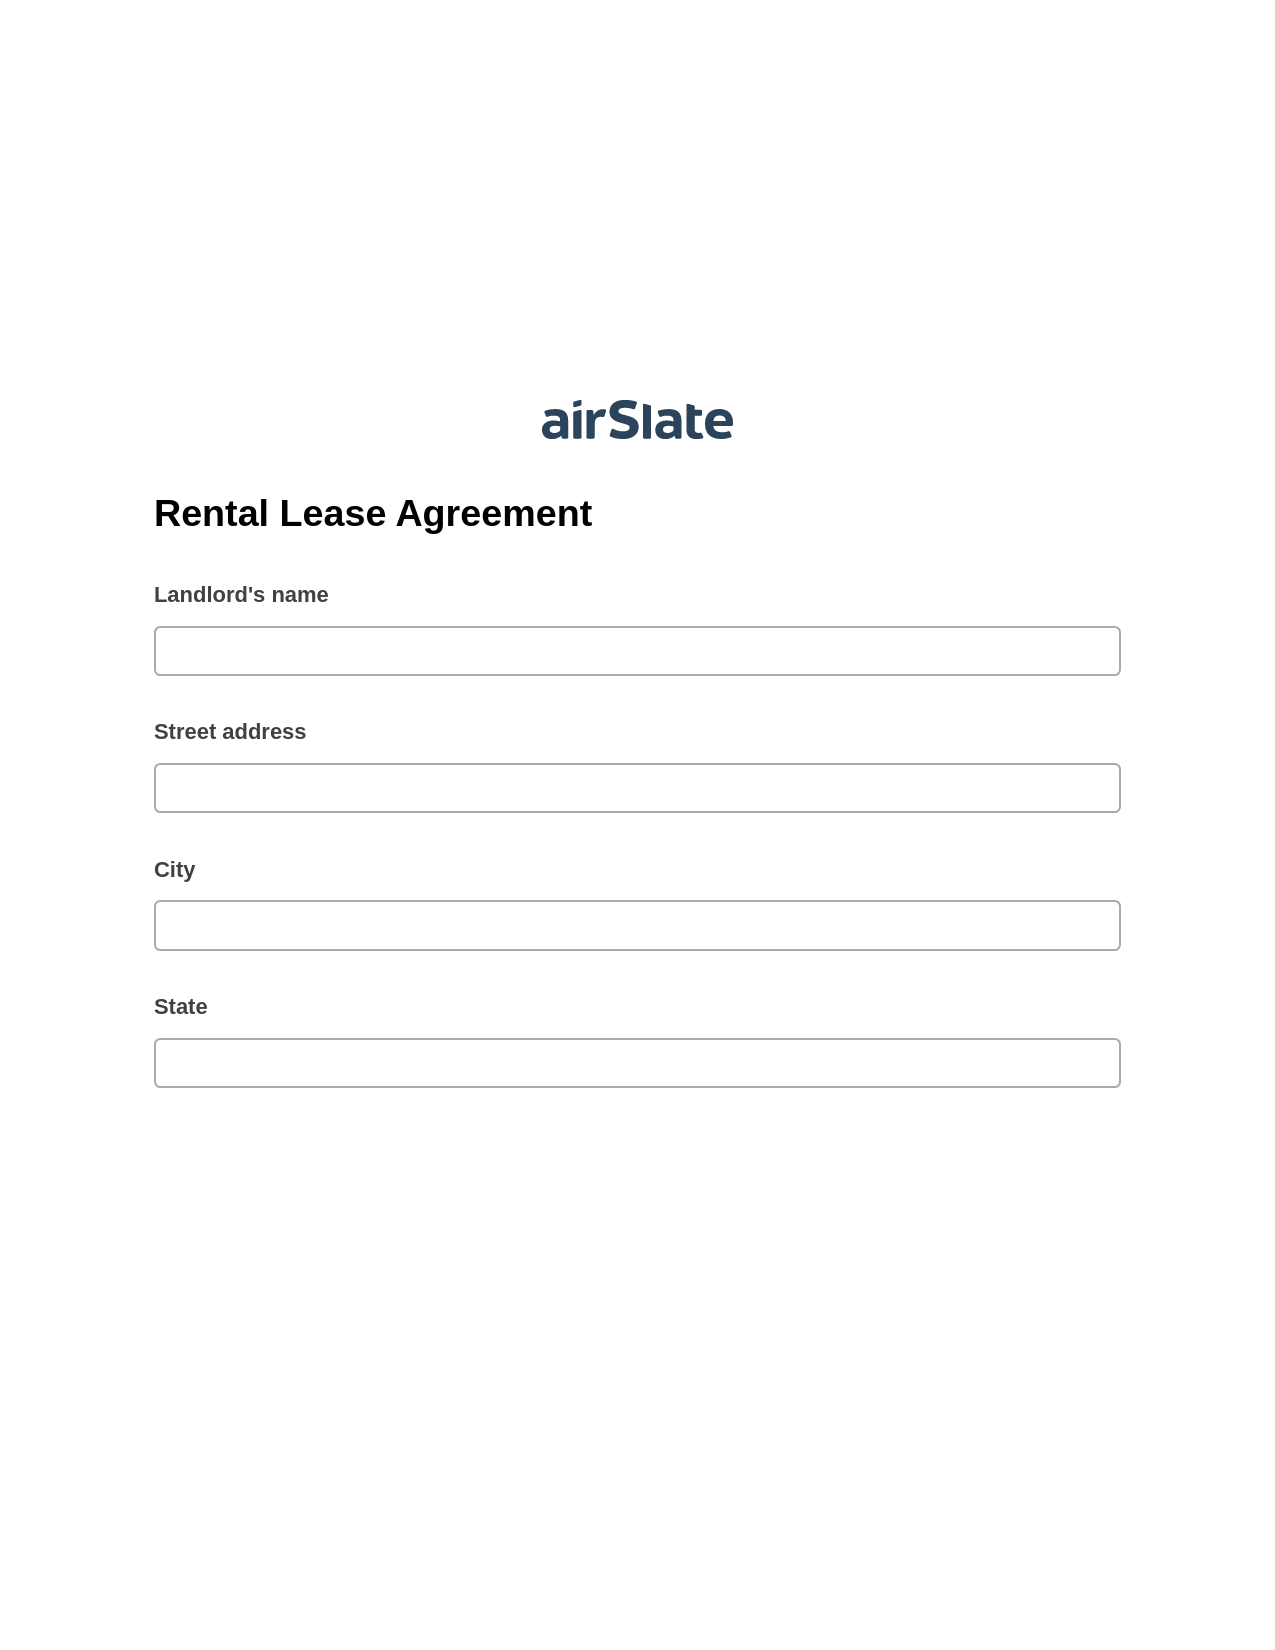 Multirole Rental Lease Agreement Pre-fill Slate from MS Dynamics 365 Records Bot, Jira Bot, Export to Excel 365 Bot